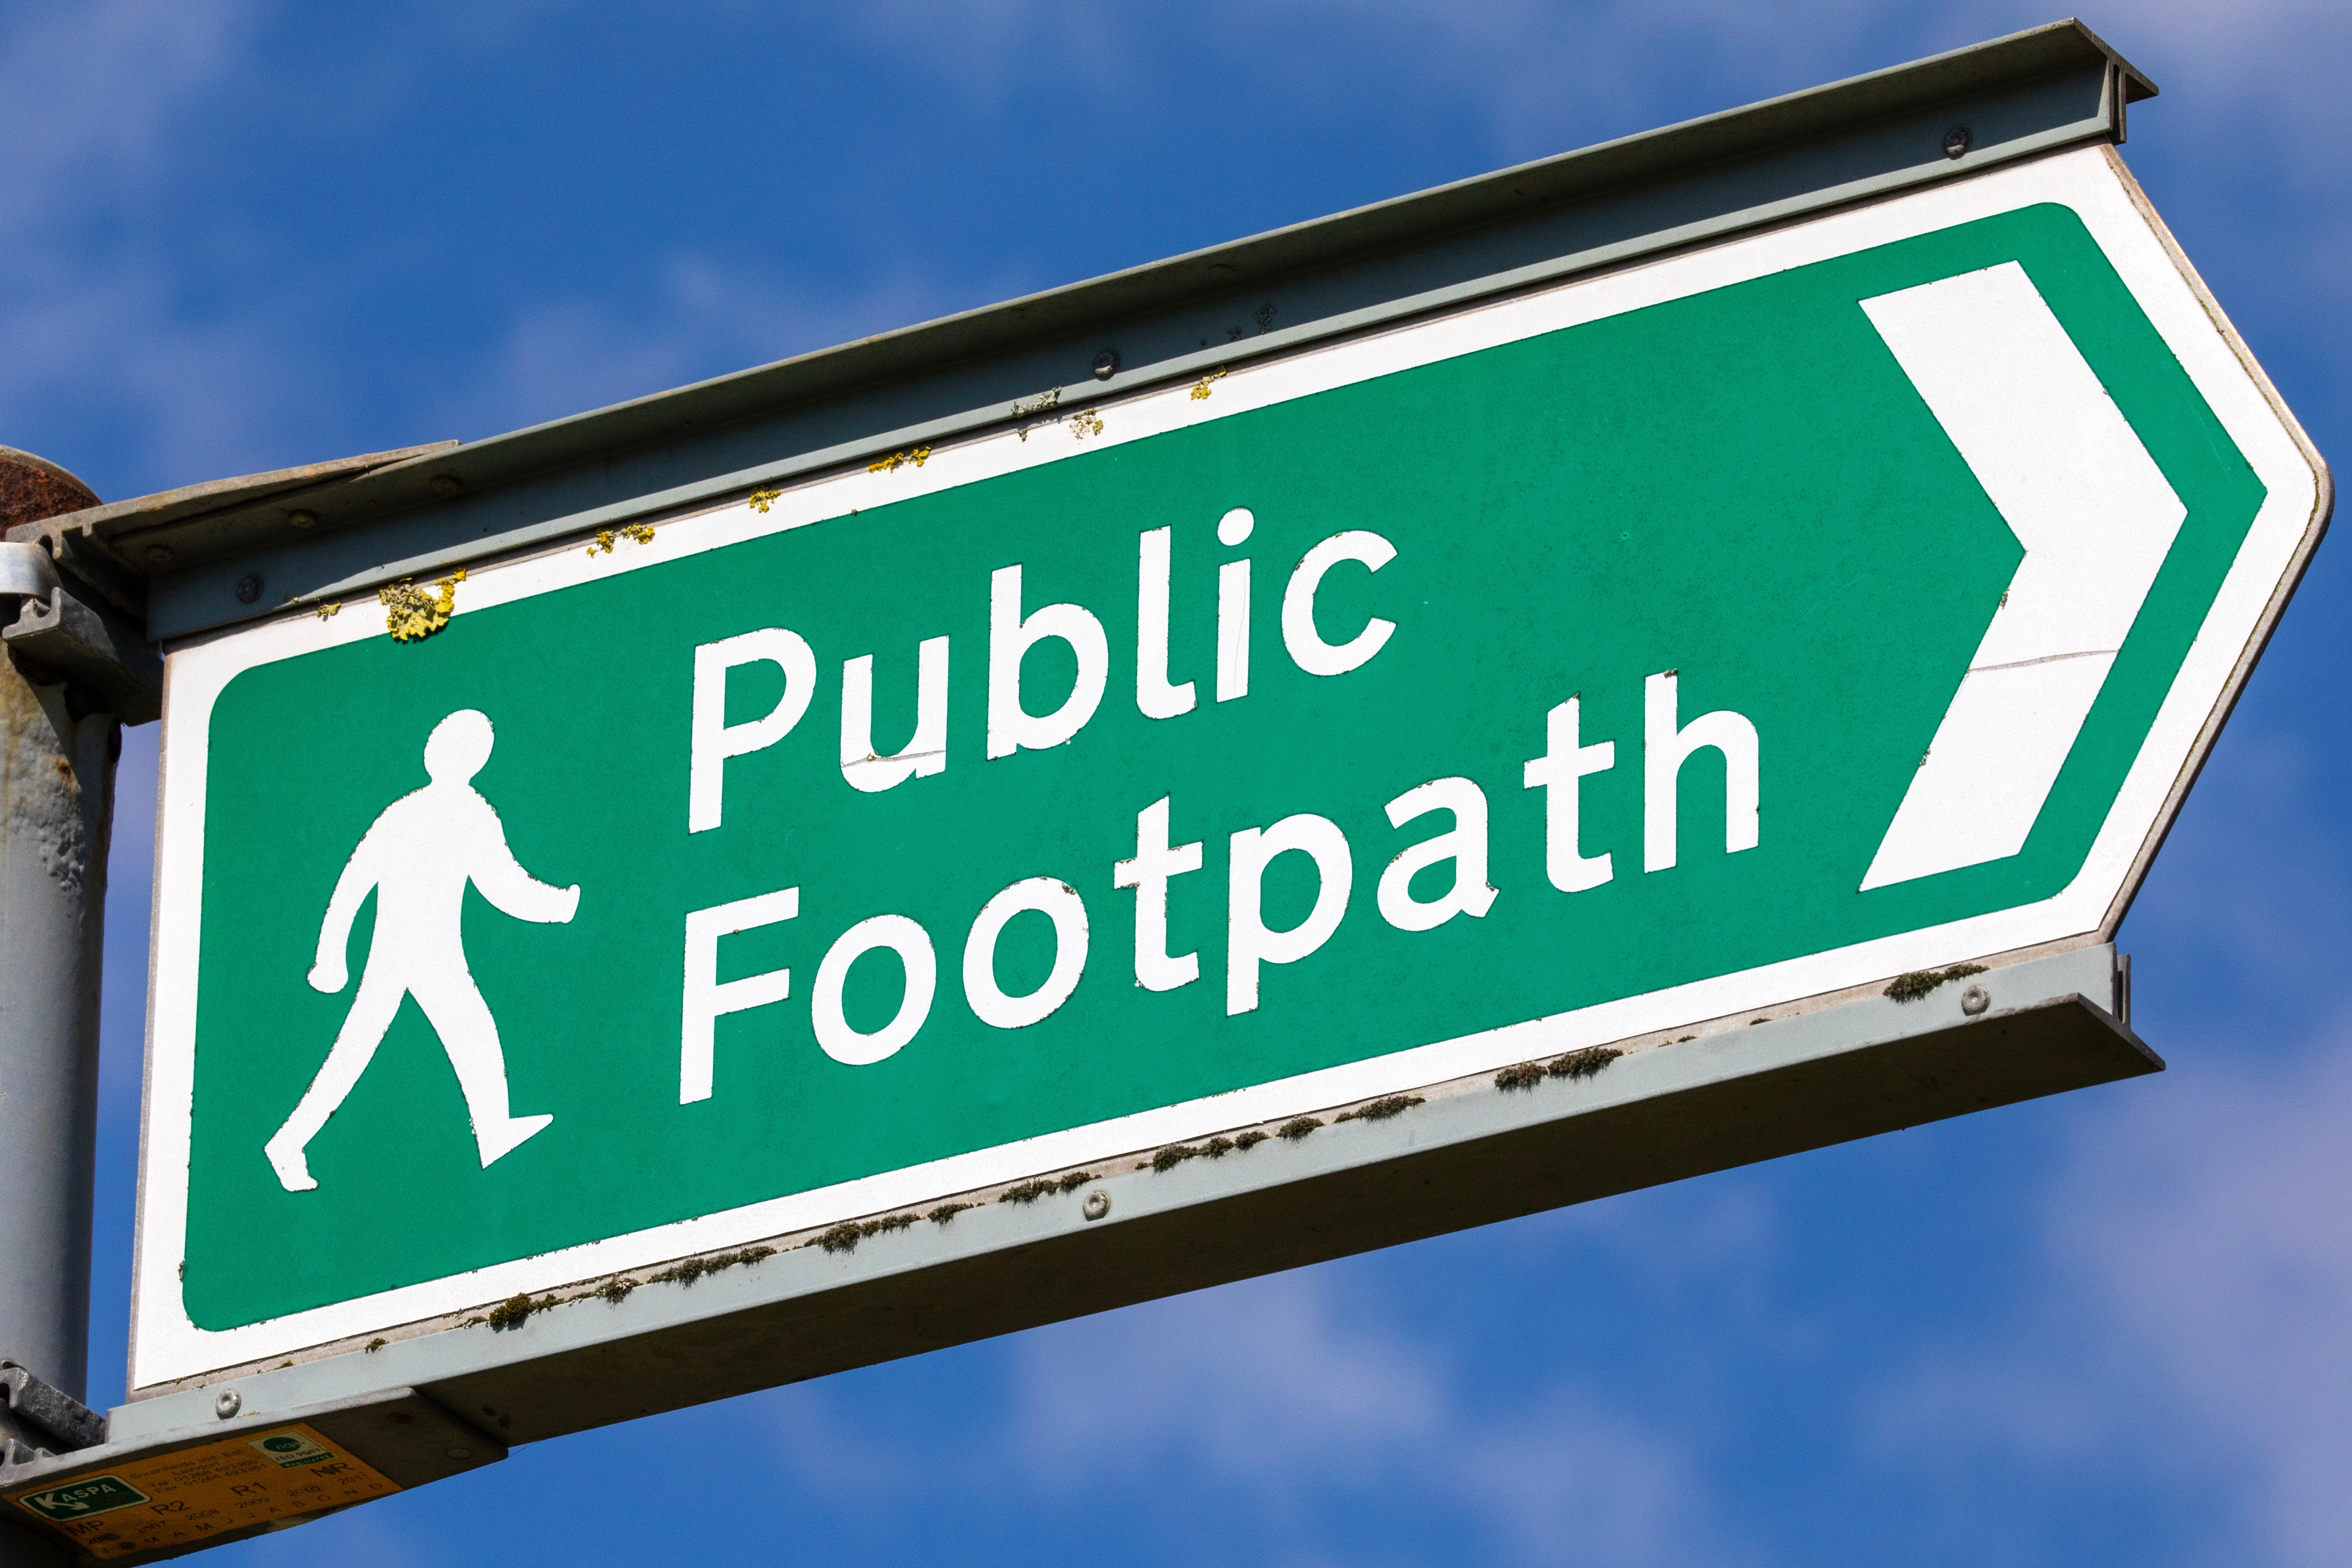 PublicFootpathSign